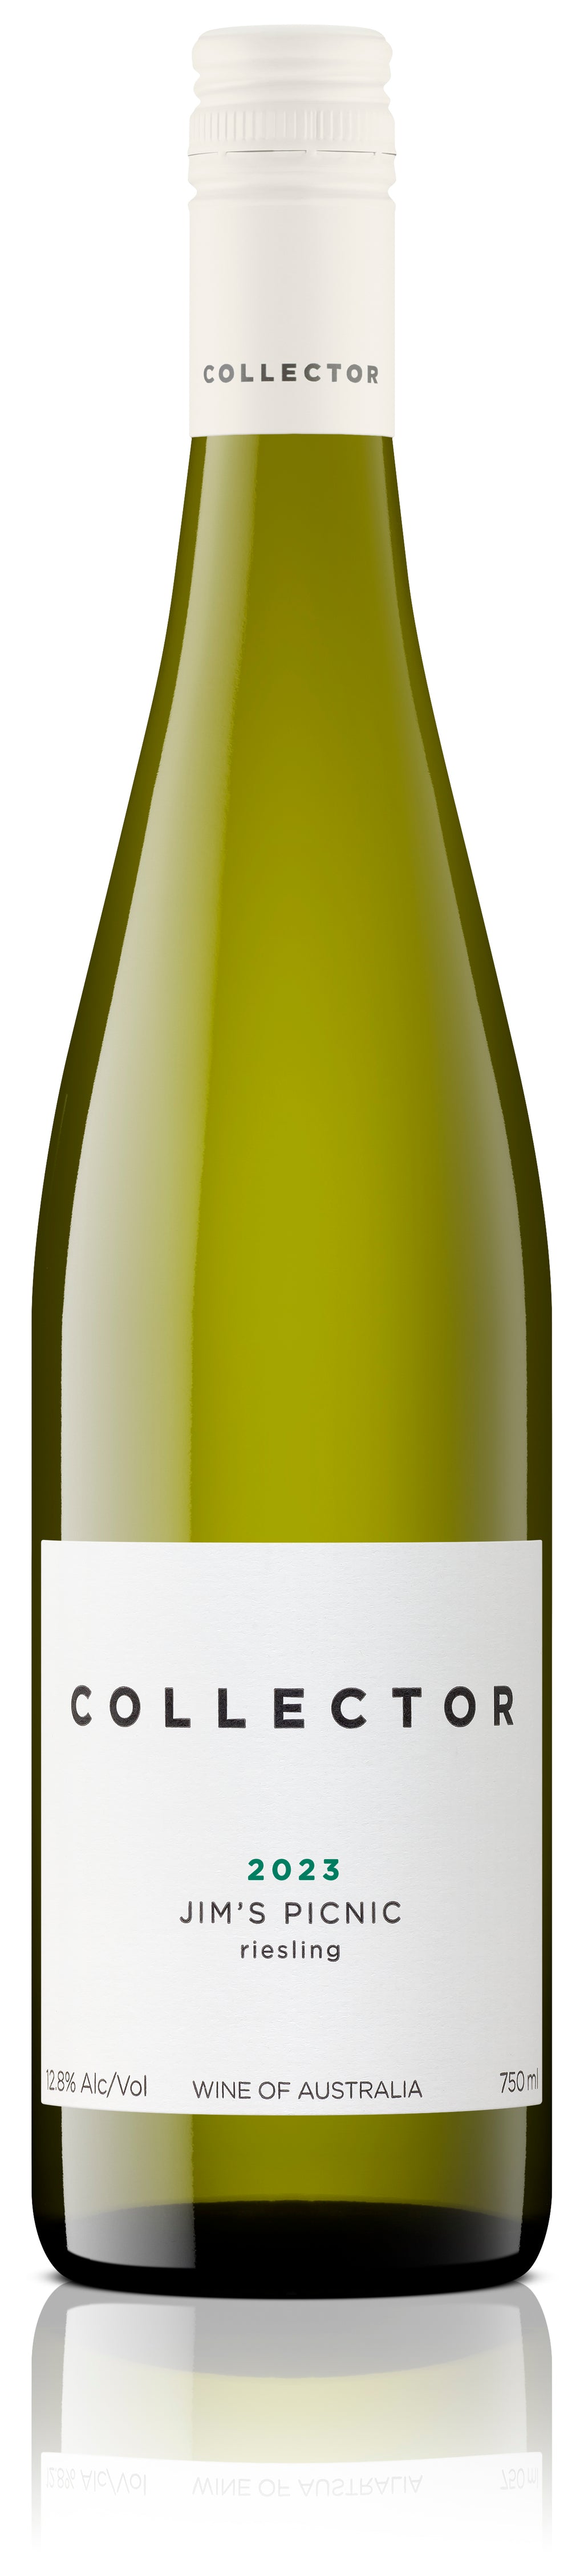 New Release - Jim's Picnic Riesling 2023